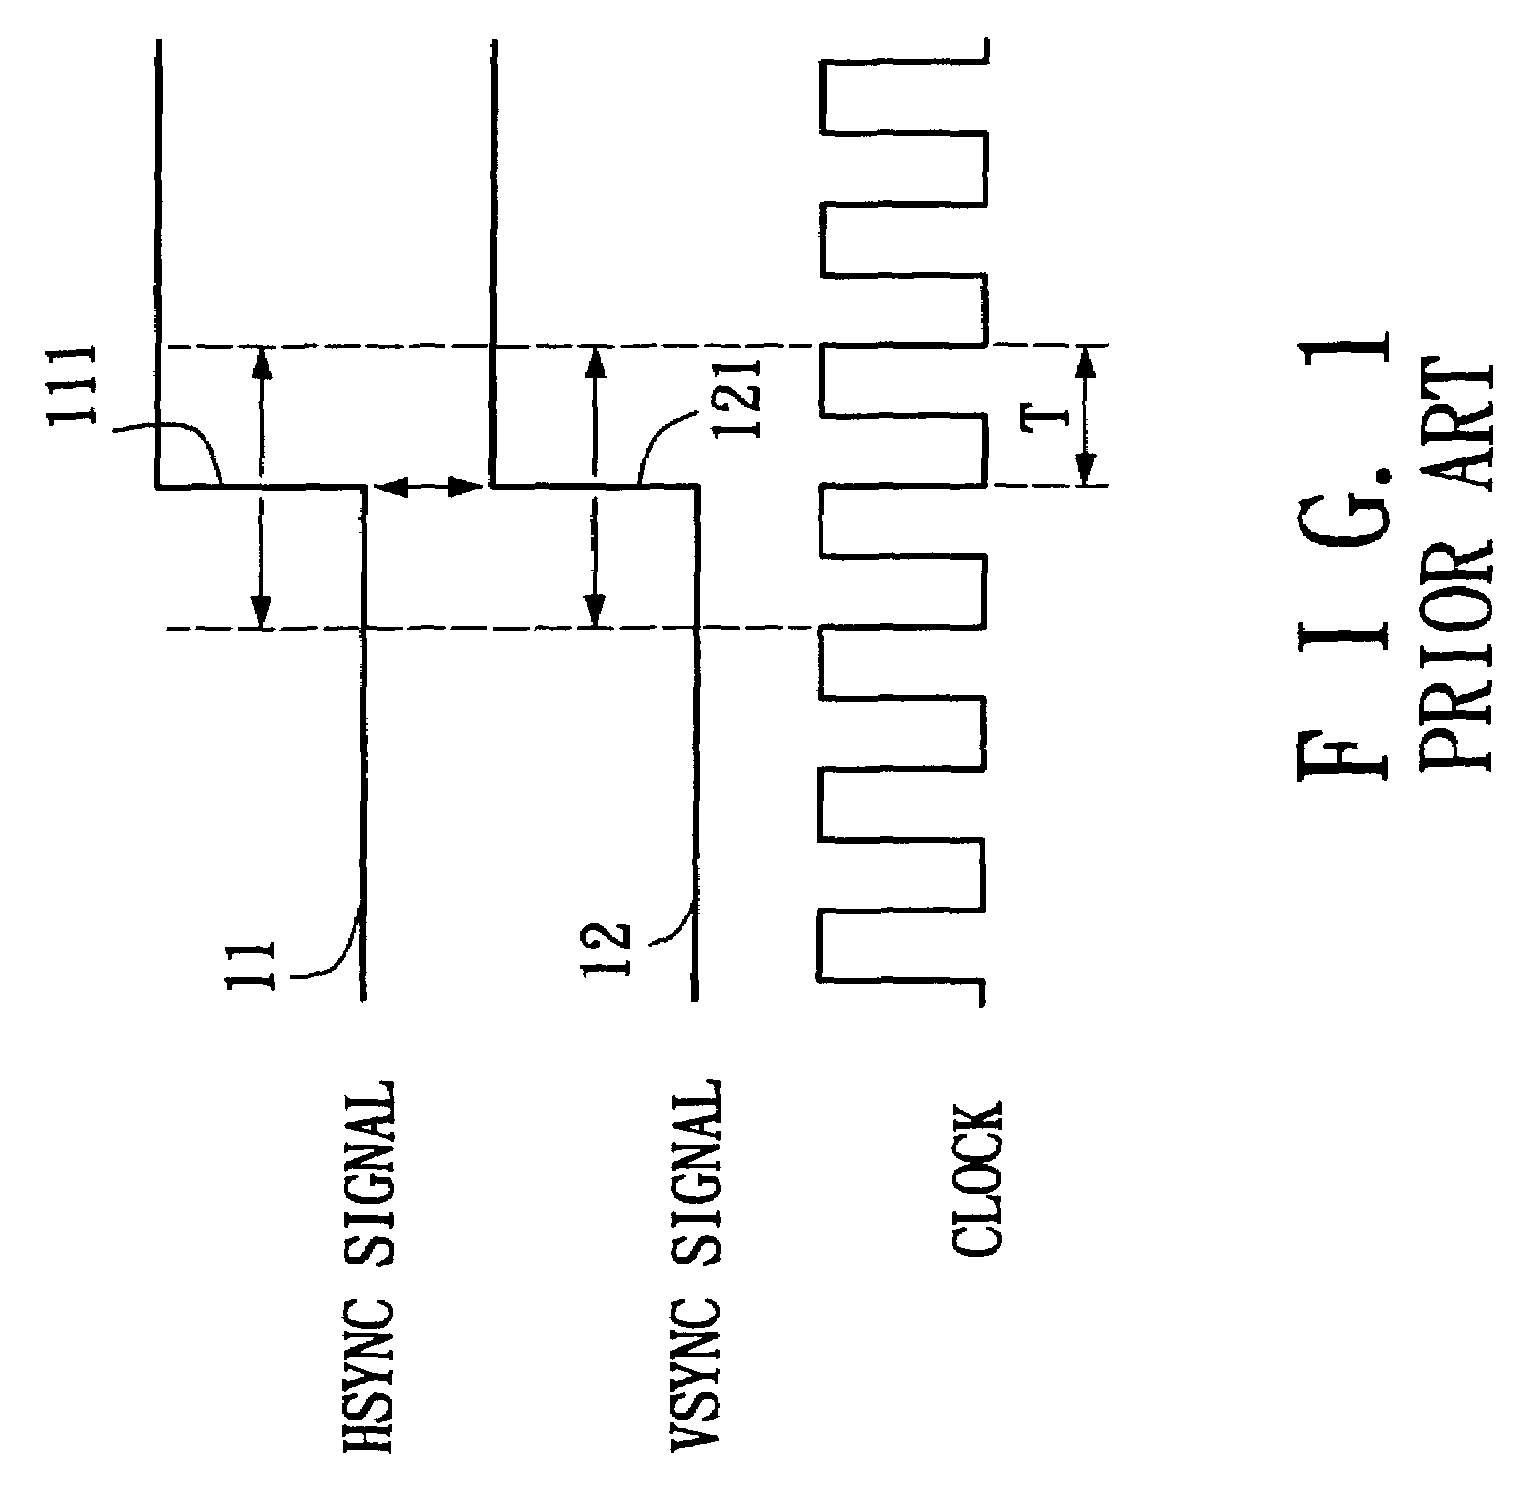 Method and apparatus for coordinating horizontal and vertical synchronization signals